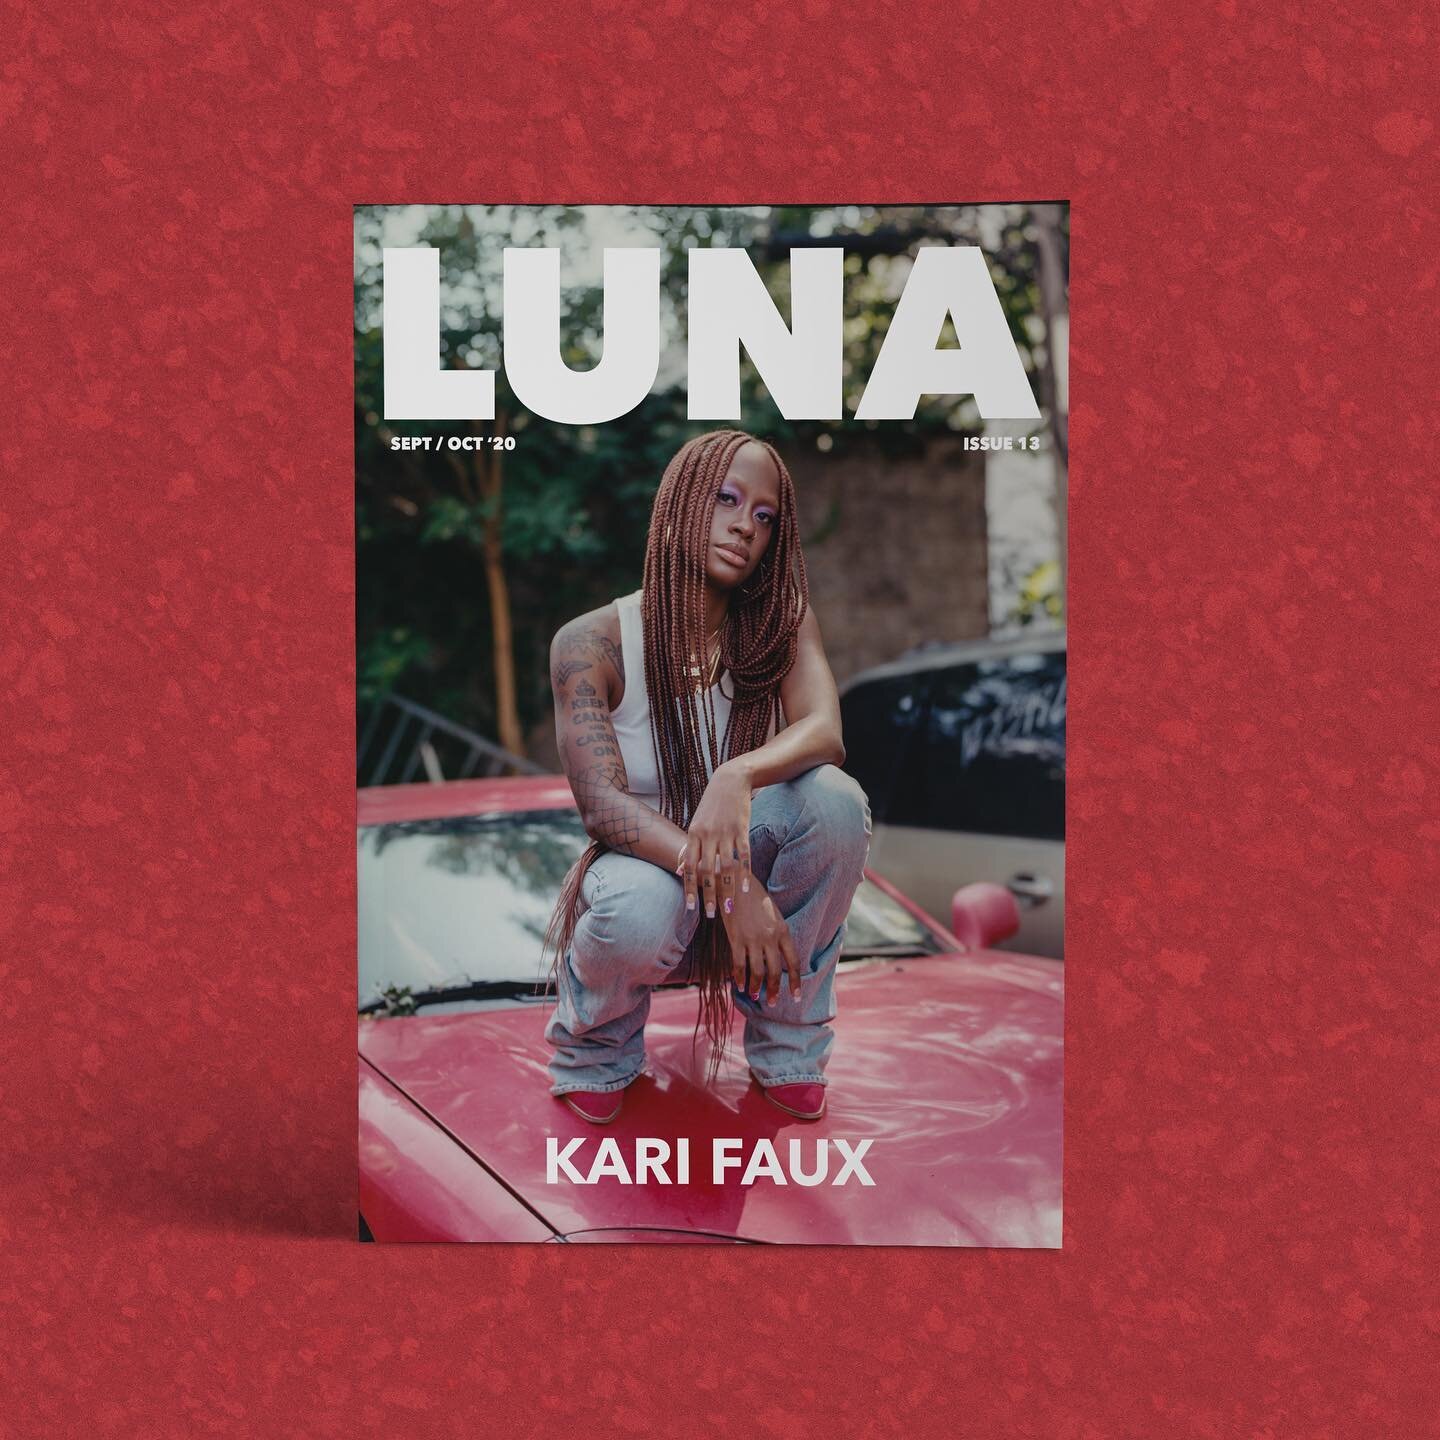 Issue 13 is OUT ⭐️ Our best issue yet featuring cover star Kari Faux + Alfie Templeman, MICHELLE, Spencer., Samone Zena + photos by Don&eacute;e Buetessa, Zachary Francois, Logan Delaney, Darrell Jackson, Athena Merry, Andrea Riba, Jonathan Roensch &